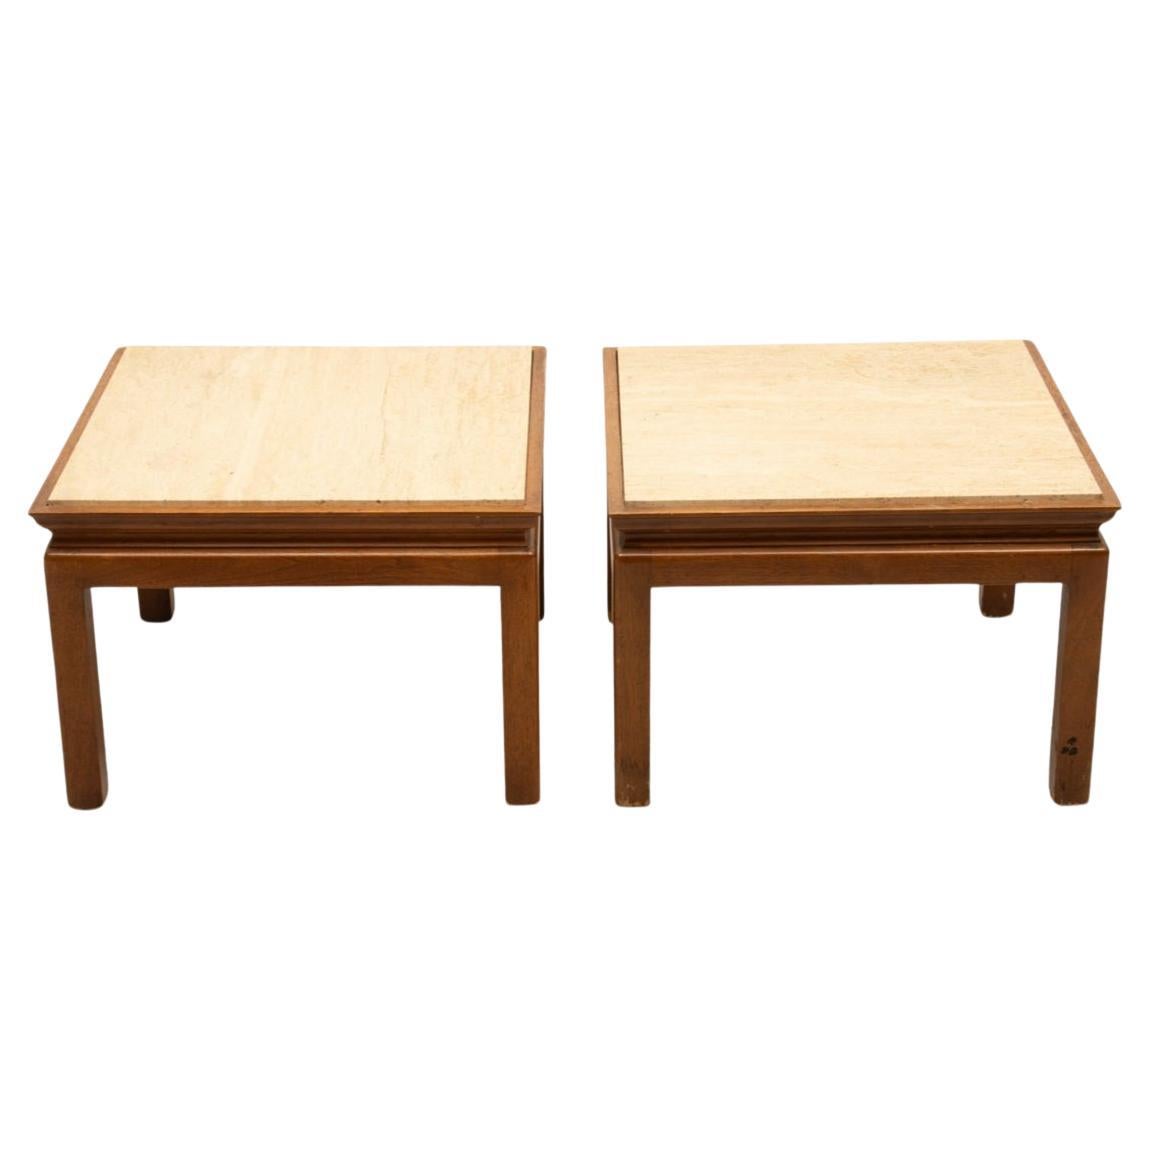 Pair of Mid Century Modern travertine end Tables by Widdicomb